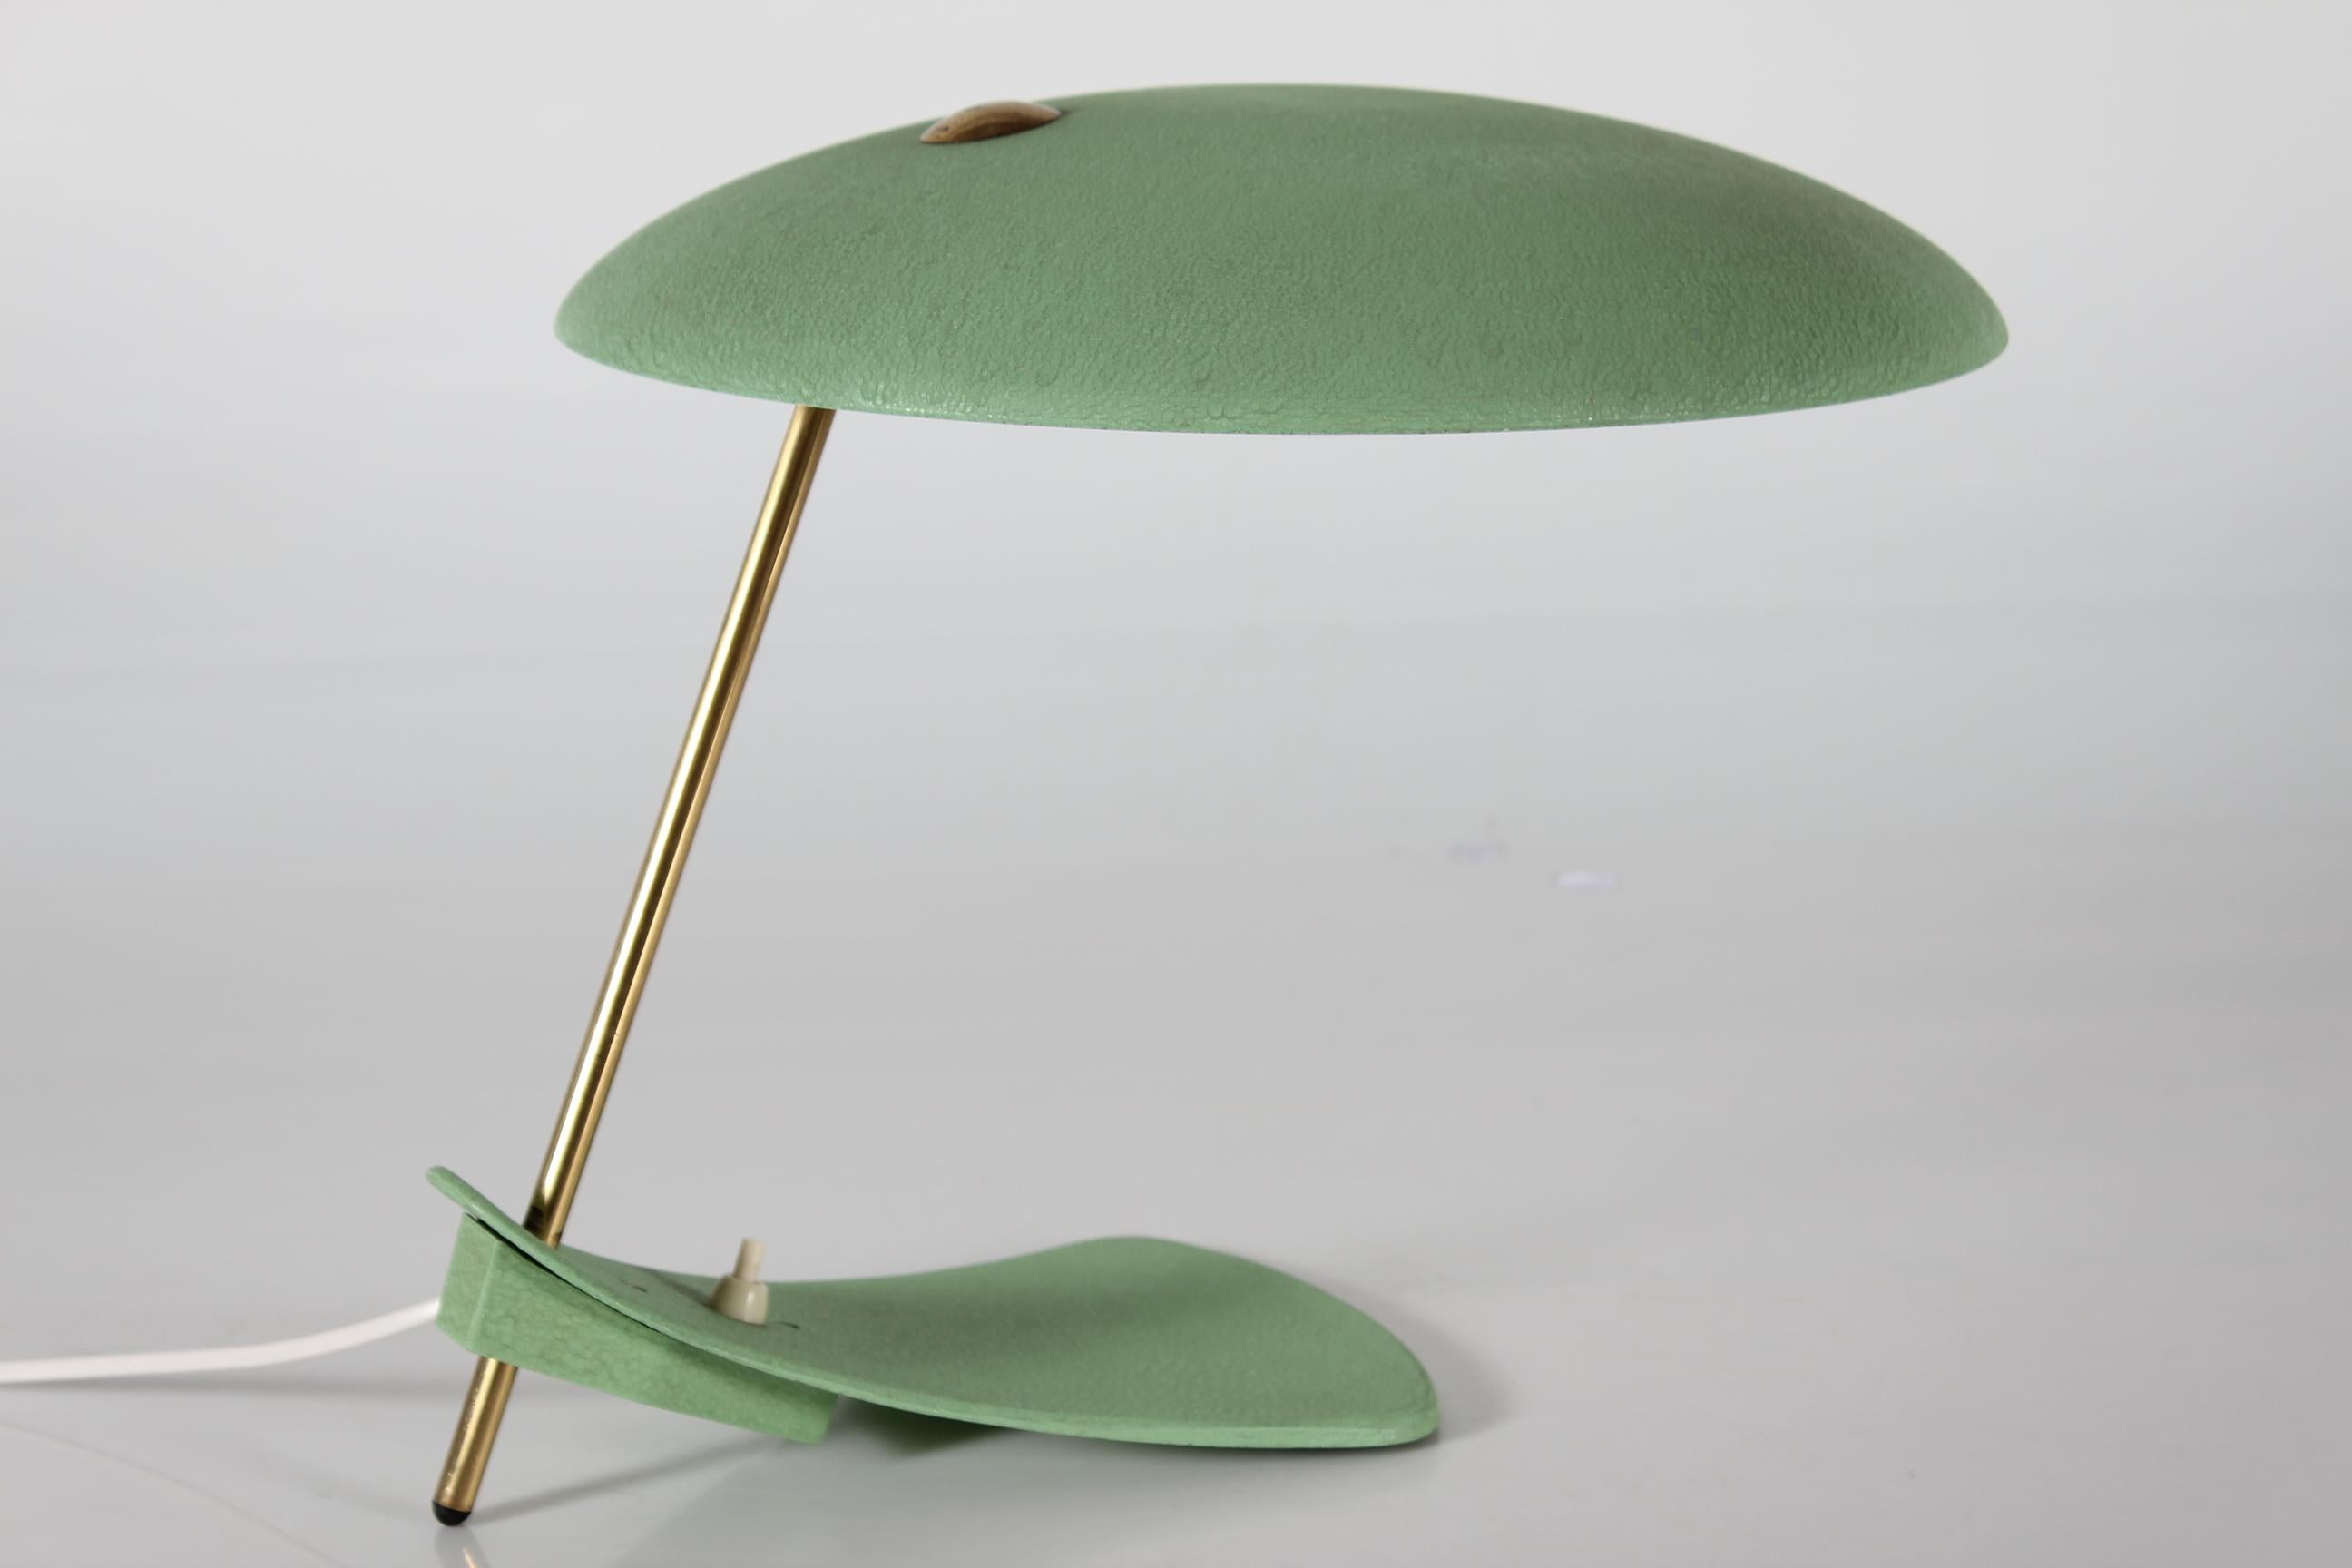 Mid-Century Modern Italian Ufo Table Lamp Dusty Green Lacquer Floating Foot, Stilnovo Style, 1950s For Sale